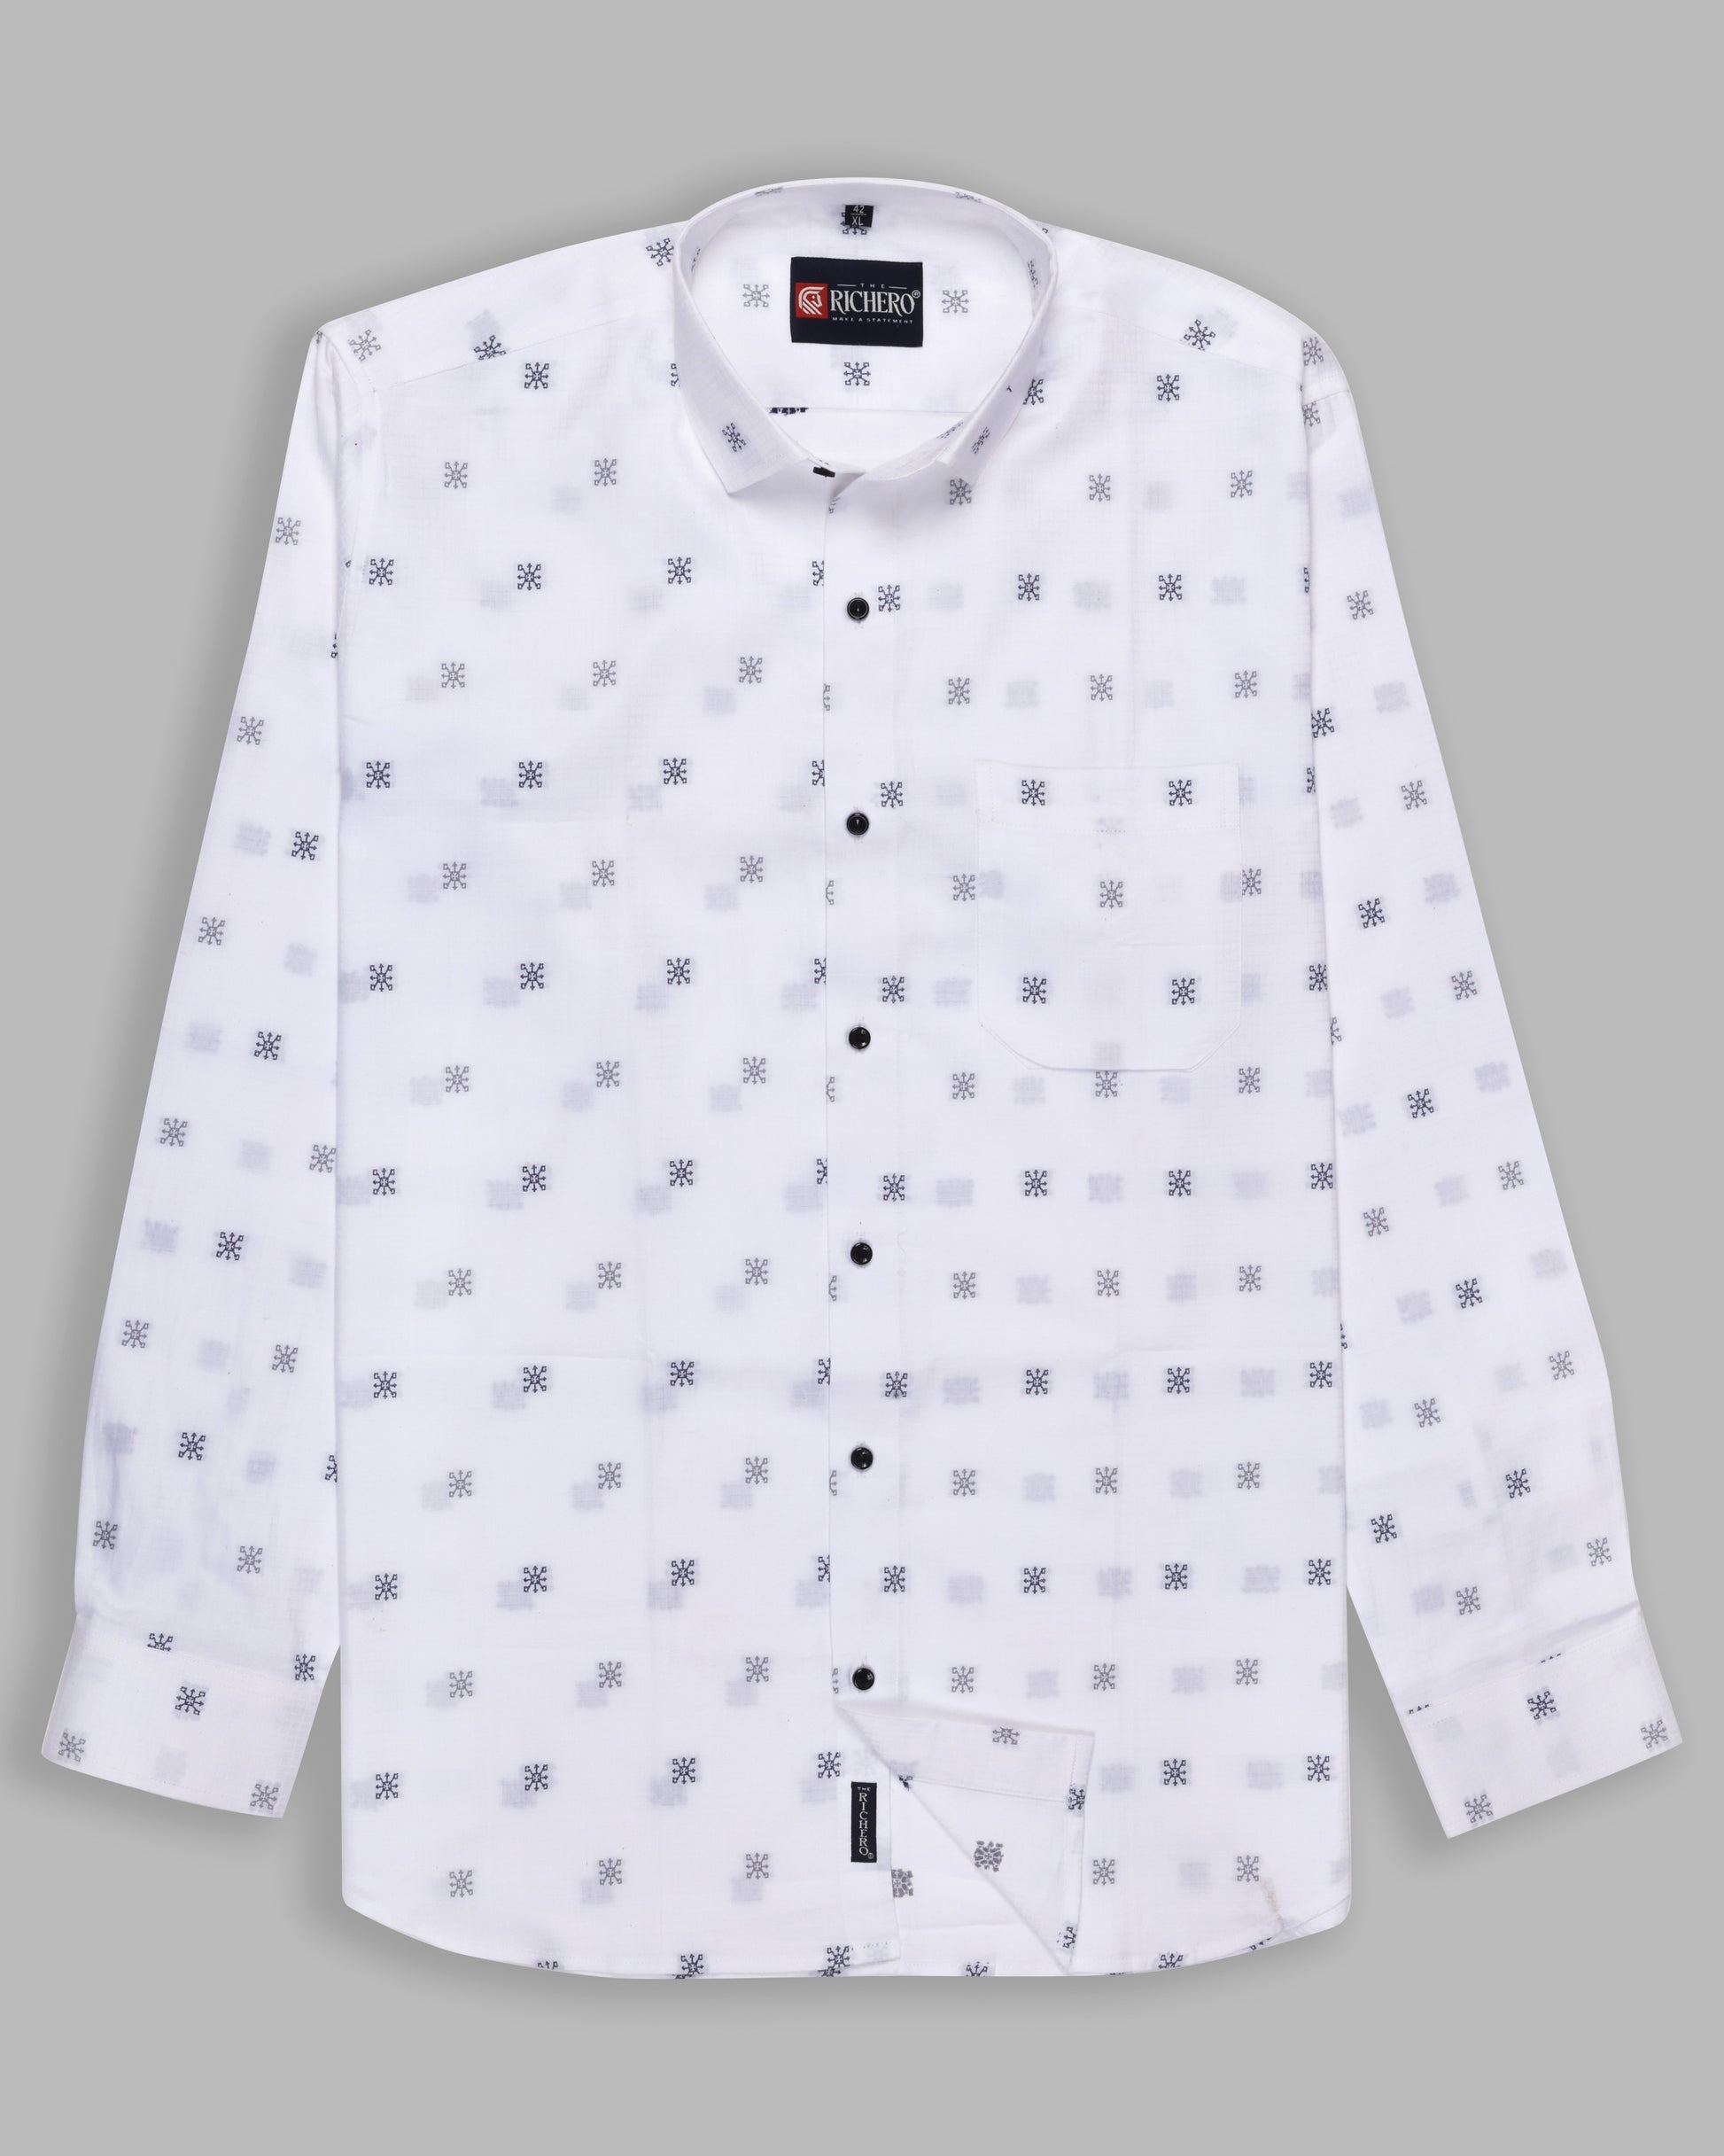 White color with Blue dot shirt